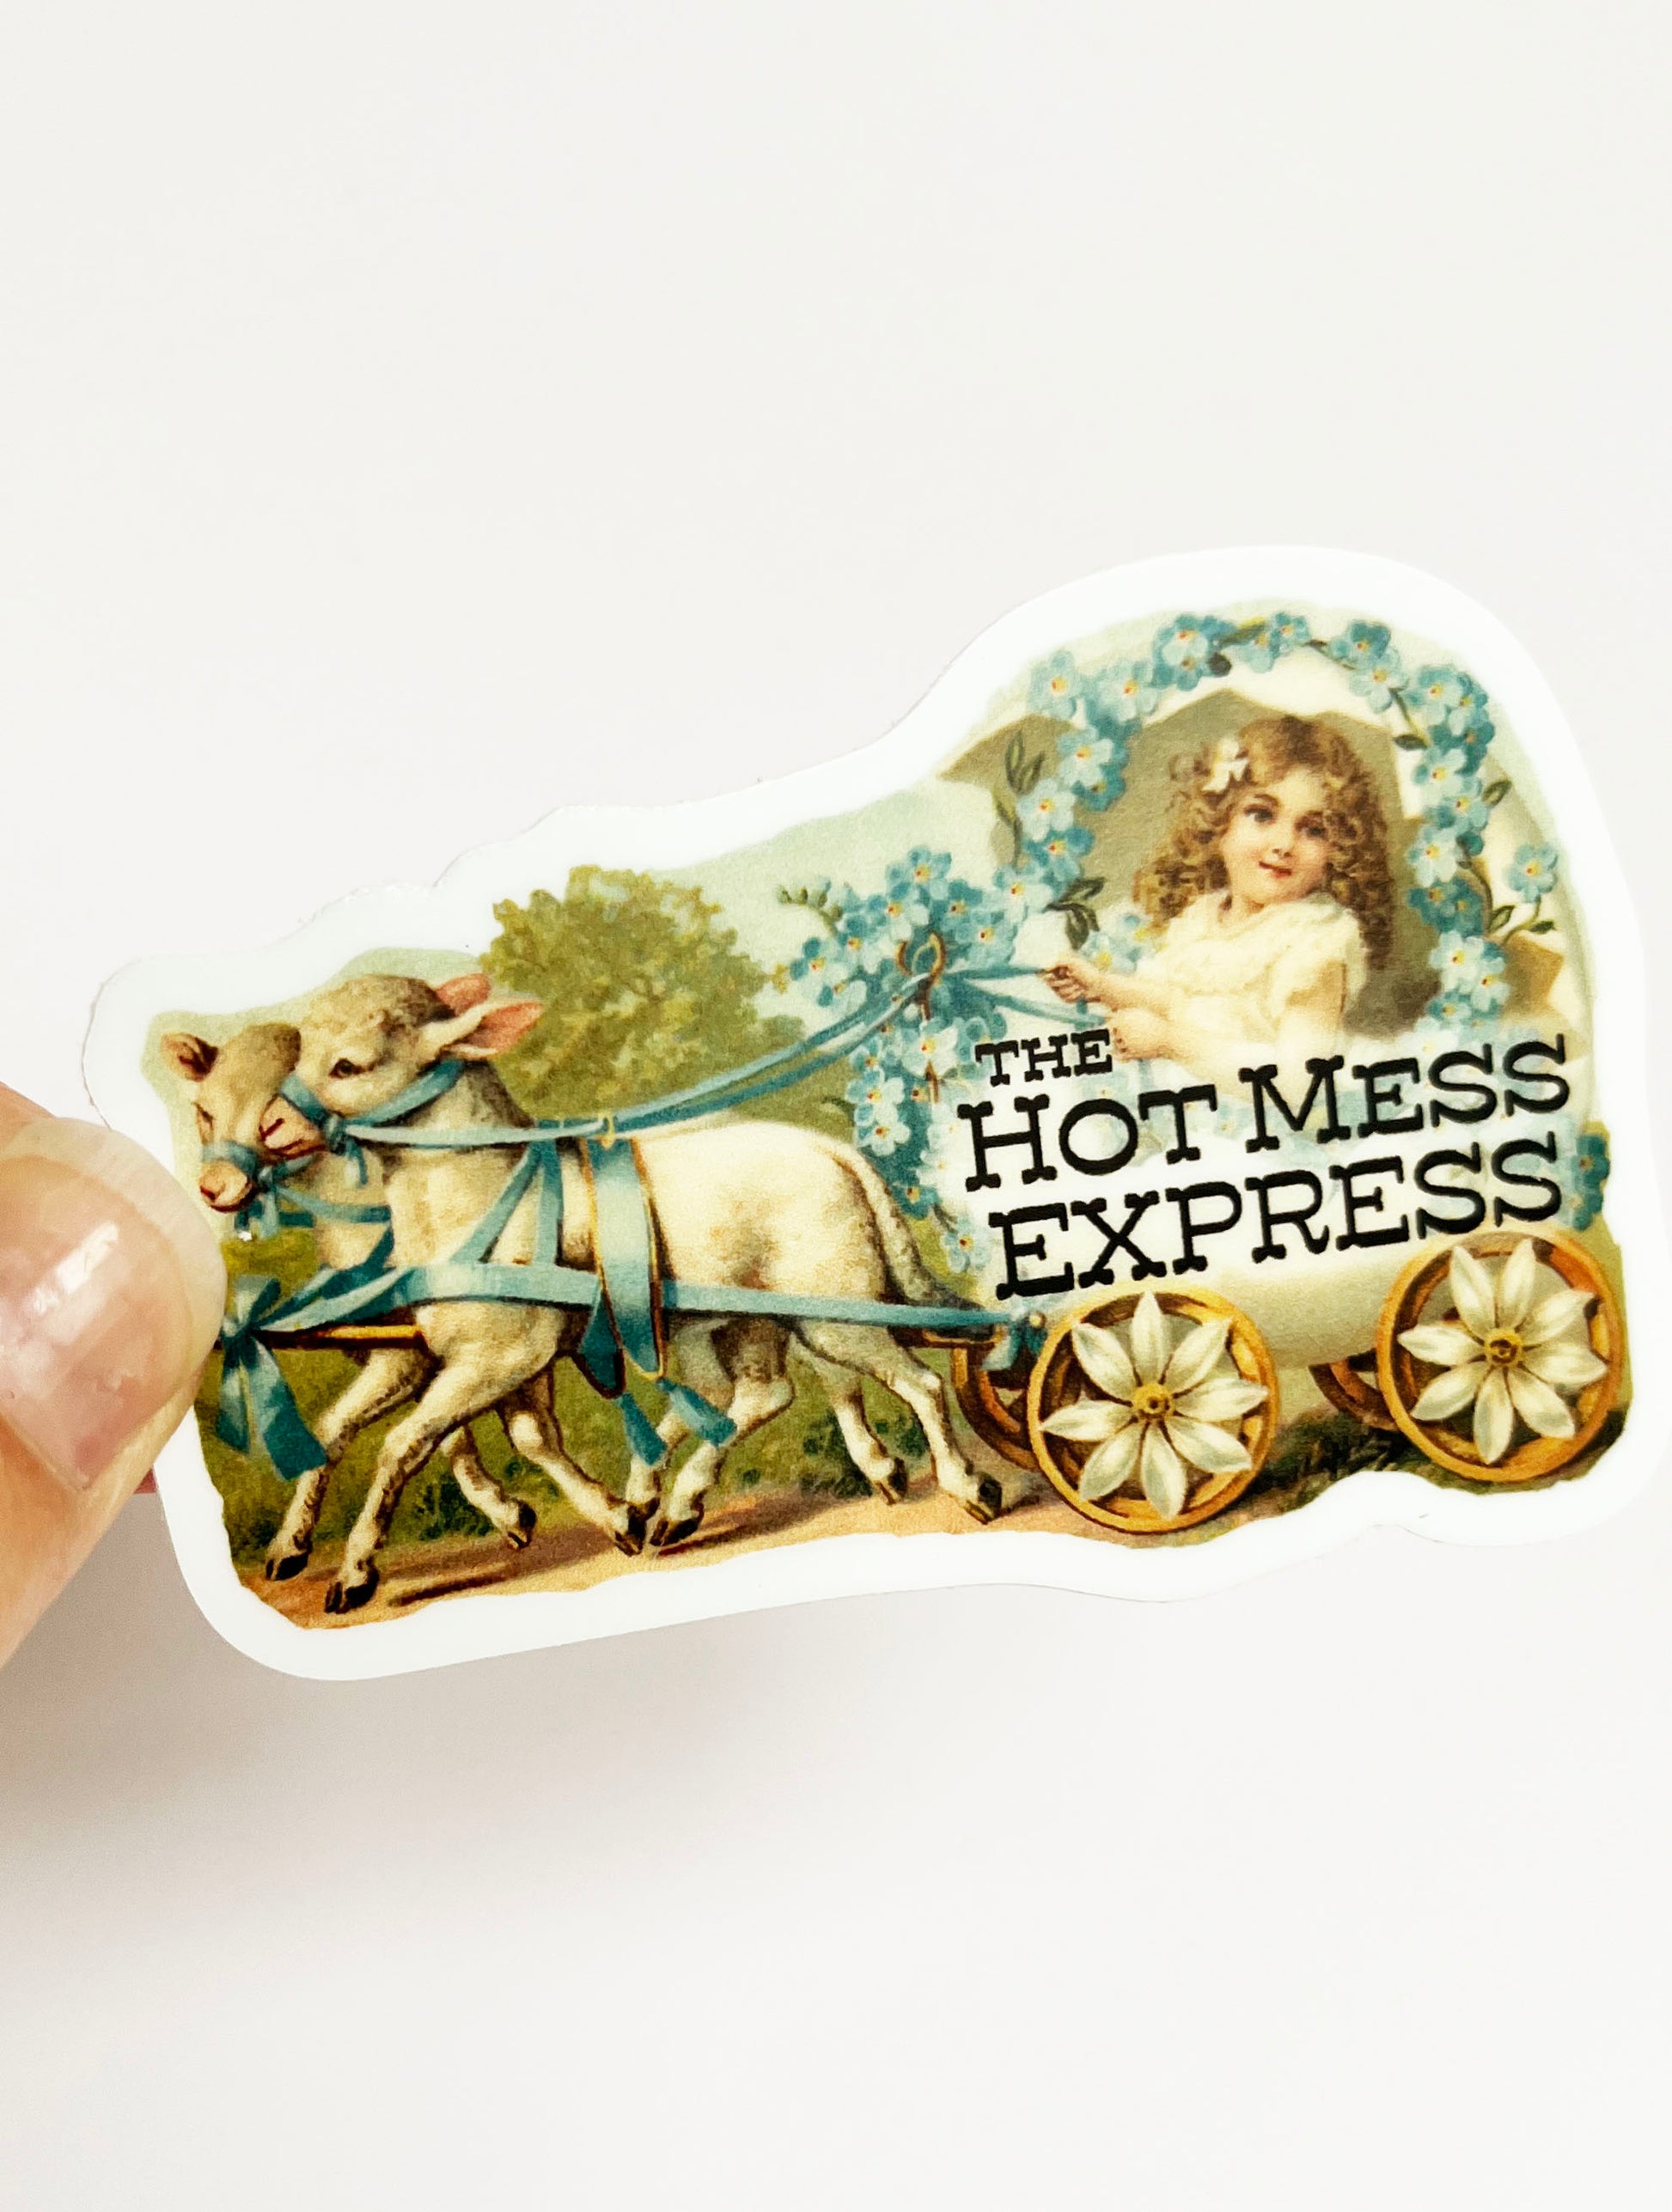 the hot mess express sticker vintage design girl in carriage pulled by sheep green blue flowers pretty funny snarky stickers coin laundry montana 